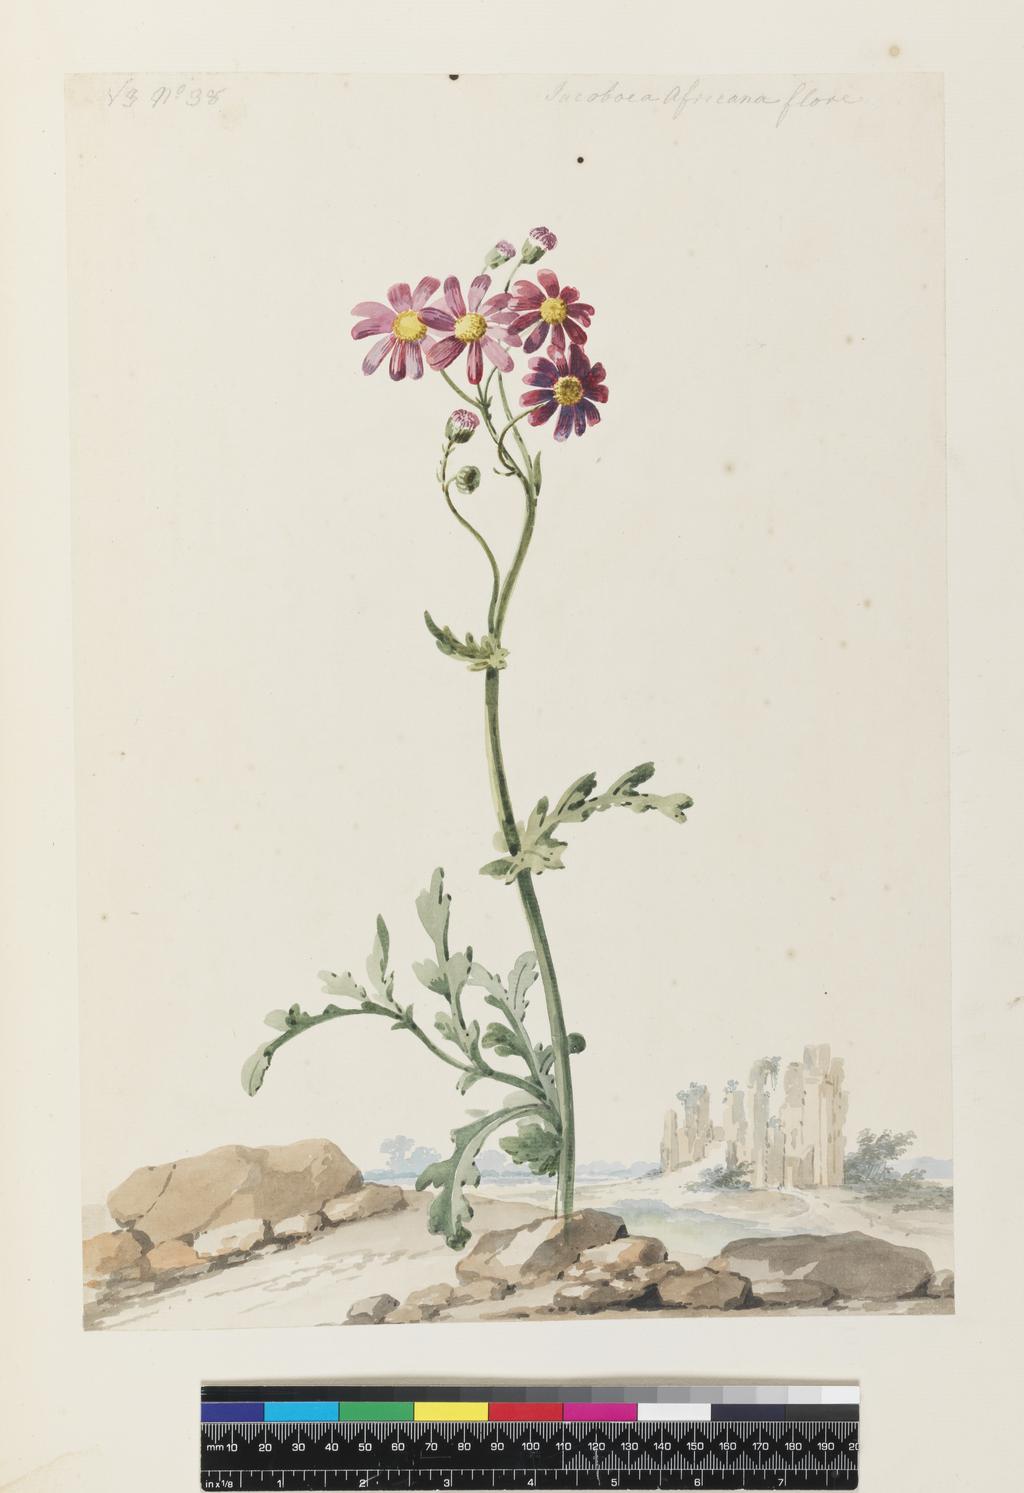 An image of Un-named: Compositae. Schouman, Aert (Dutch, 1710-1792). A growing plant with simple erect stem and terminal flower head and lobed leaves in rocky landscape with ruined castle. Watercolour on laid paper, height 378 mm, width 264 mm.